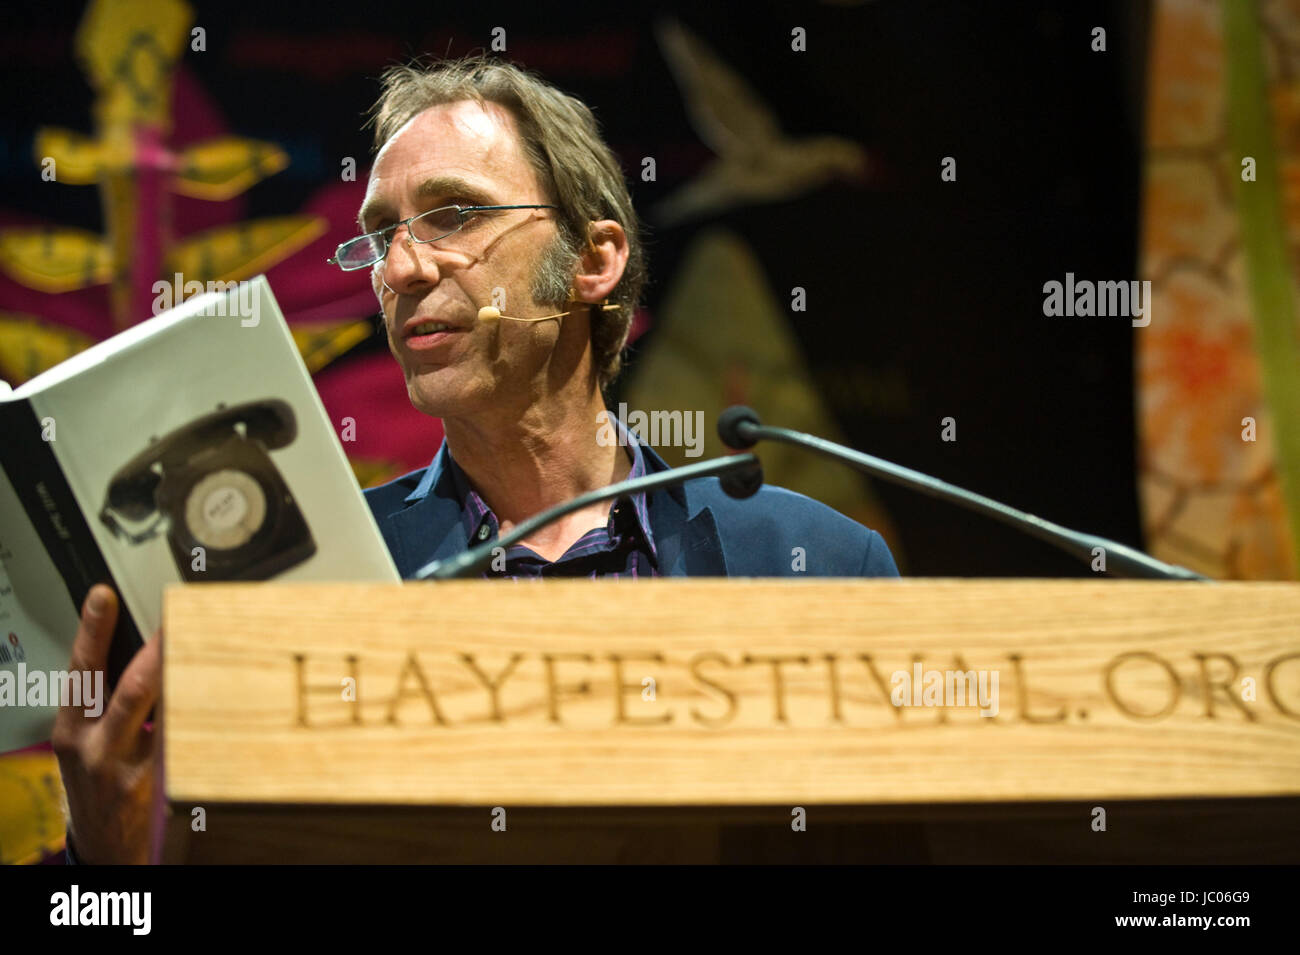 Will Self novelist reading from his novel Phone on stage at lectern during Hay Festival 2017 Hay-on-Wye Powys Wales UK Stock Photo